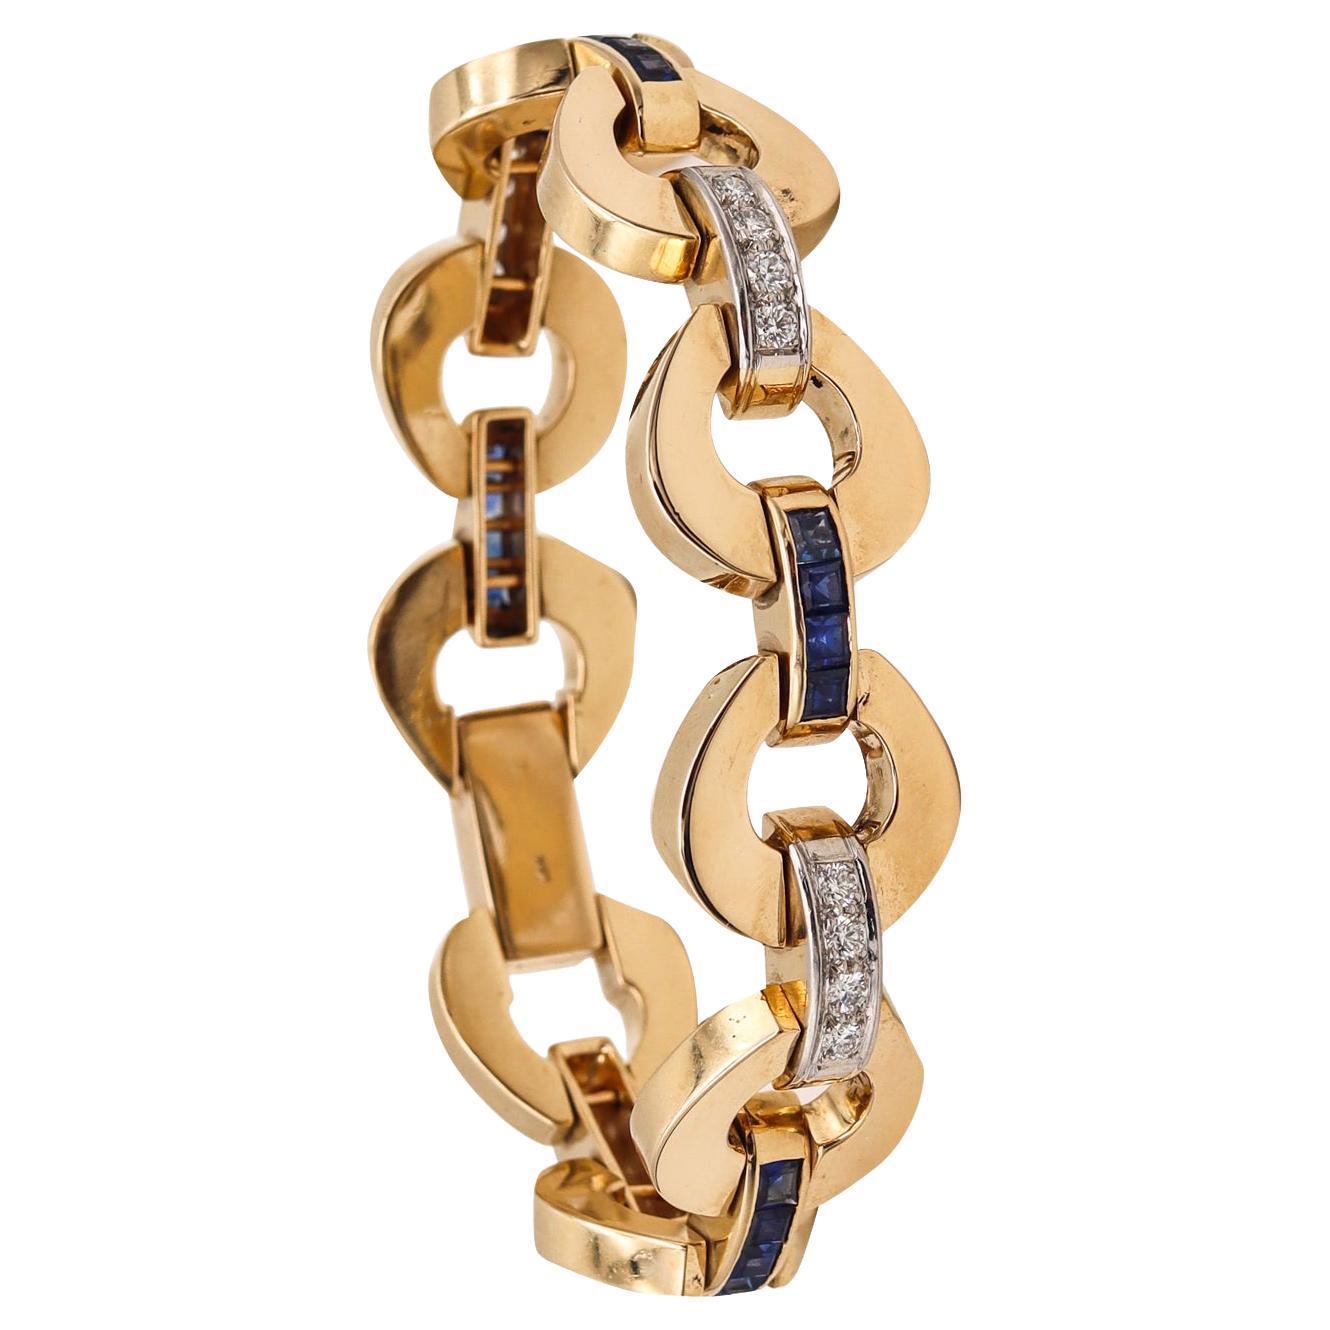 Retro Modernist Bracelet in 14Kt Yellow Gold with 6.56 Ctw Diamonds & Sapphires For Sale